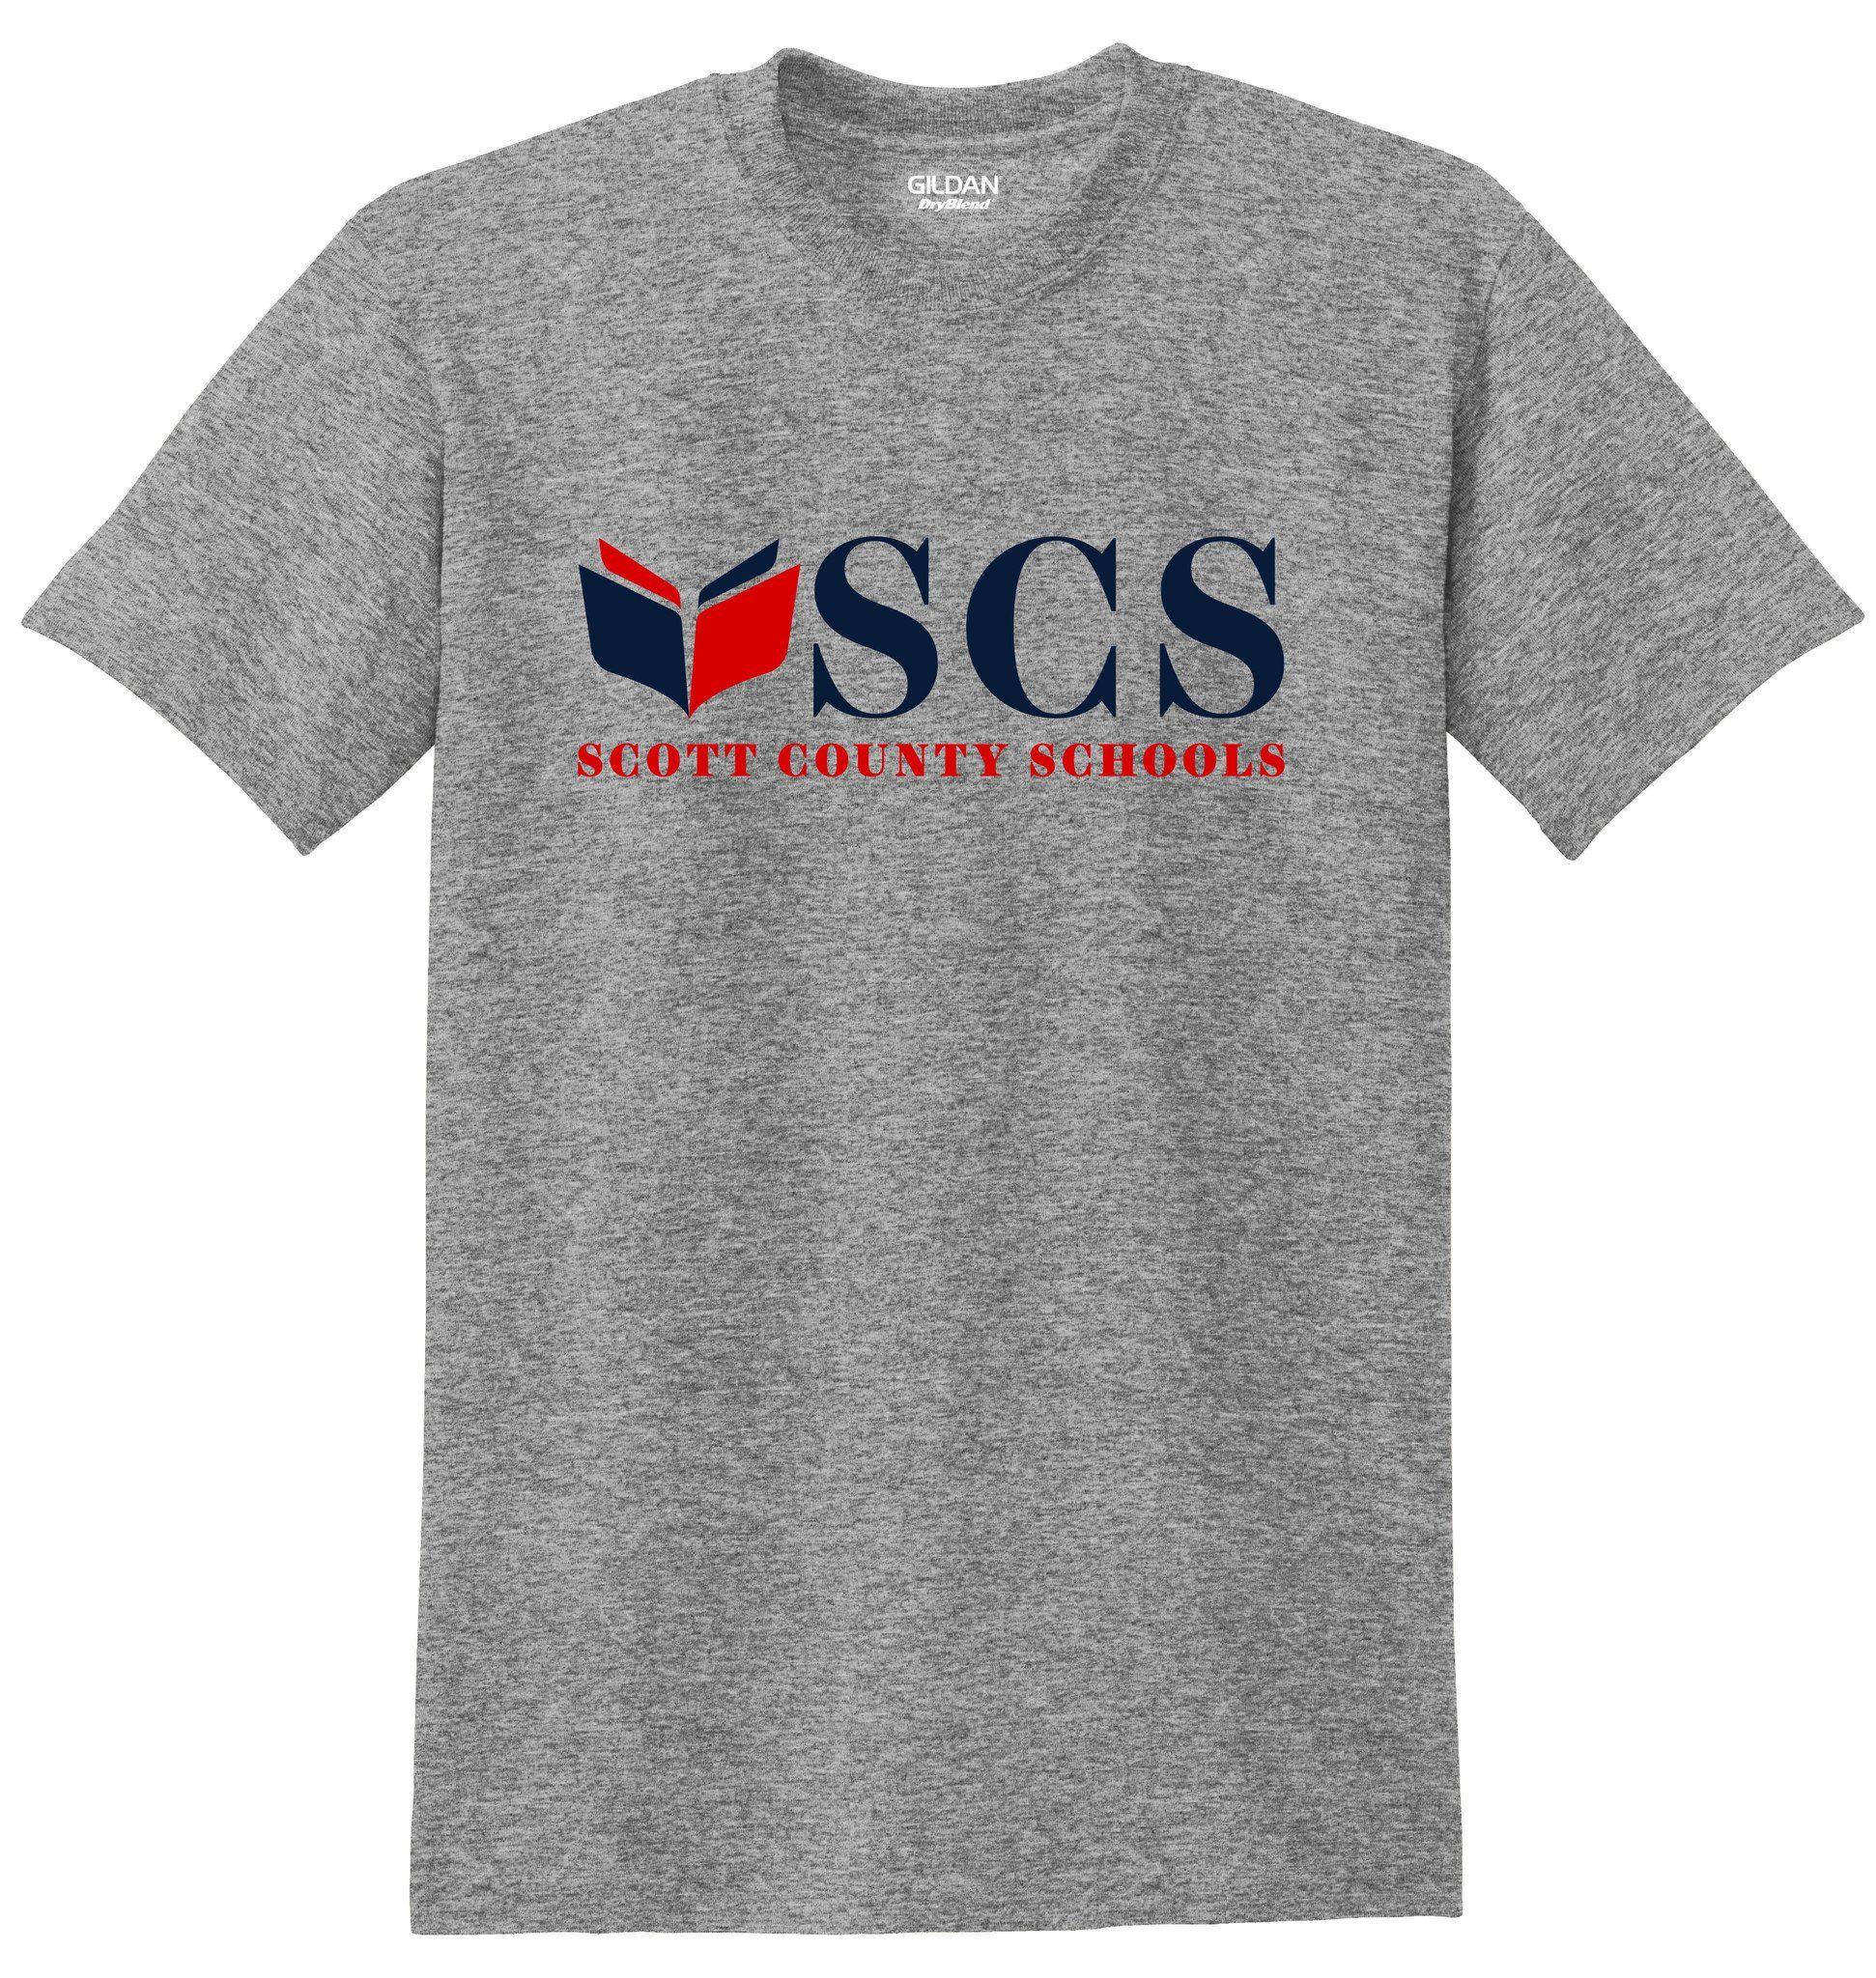 What Schools Have a Red T Logo - SCS Short Sleeve Tee With Navy Red Logo. Colors